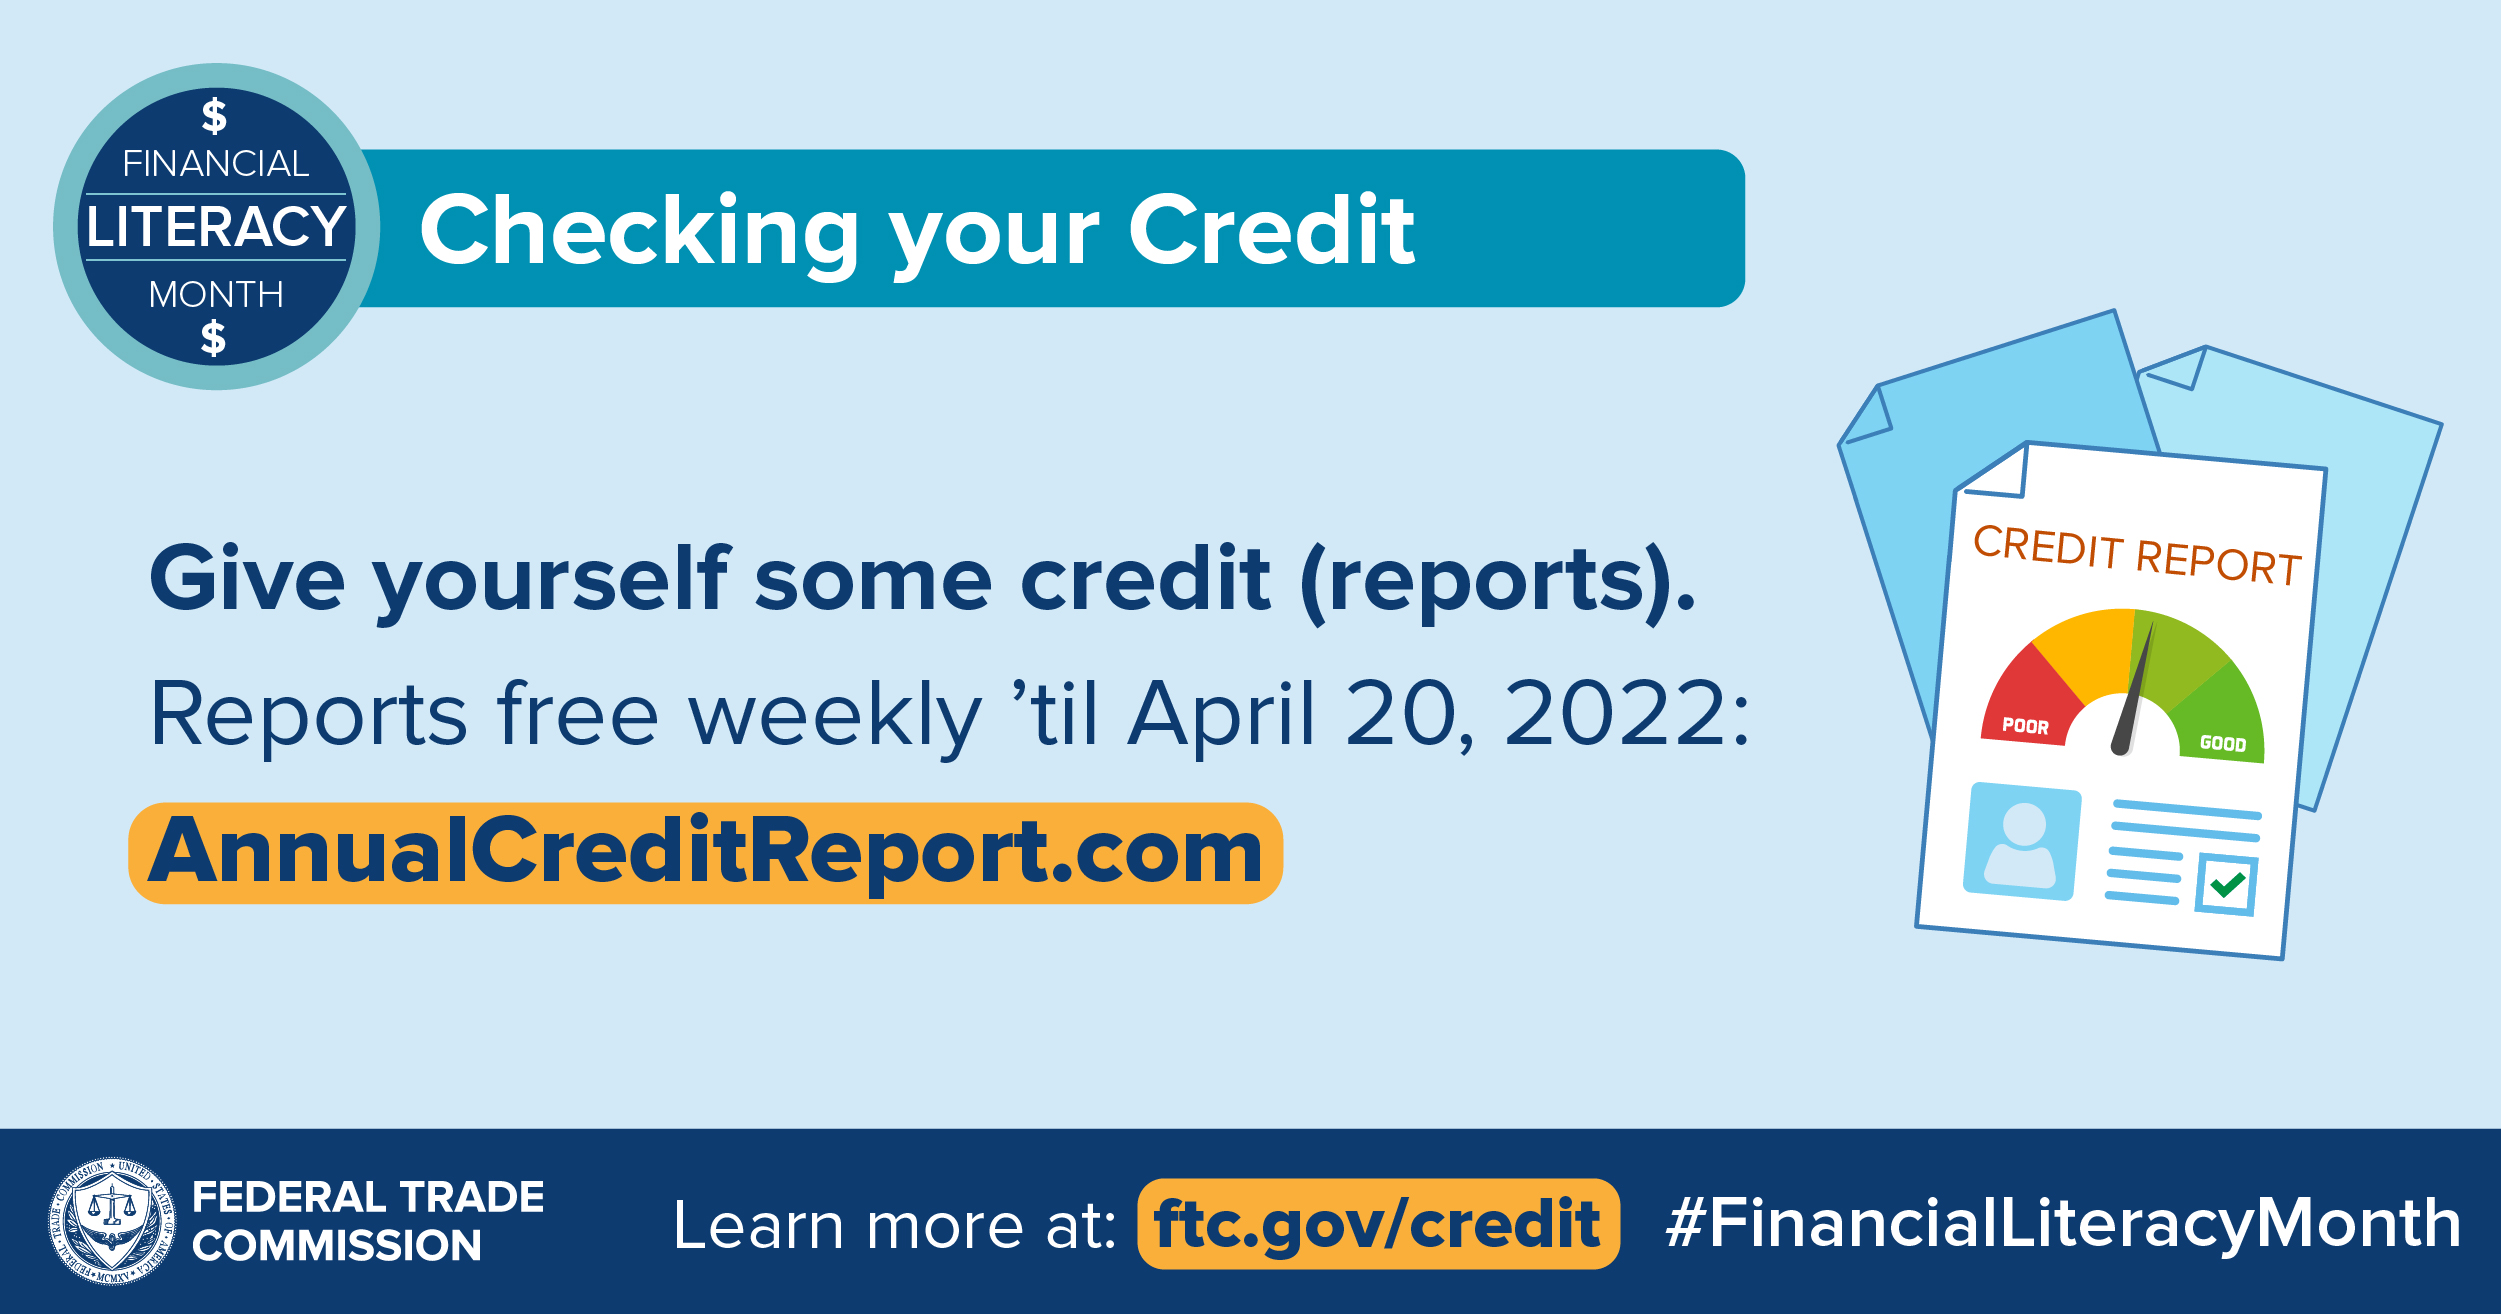 Financial Literacy Month: Checking Your Credit. Give yourself some credit (reports). Reports free weekly 'til April 20,2022: AnnualCreditReport.com. Federal Trade Commission. Learn moreat: ftc.gov/credit #FinancialLiteracyMonth. Annual 